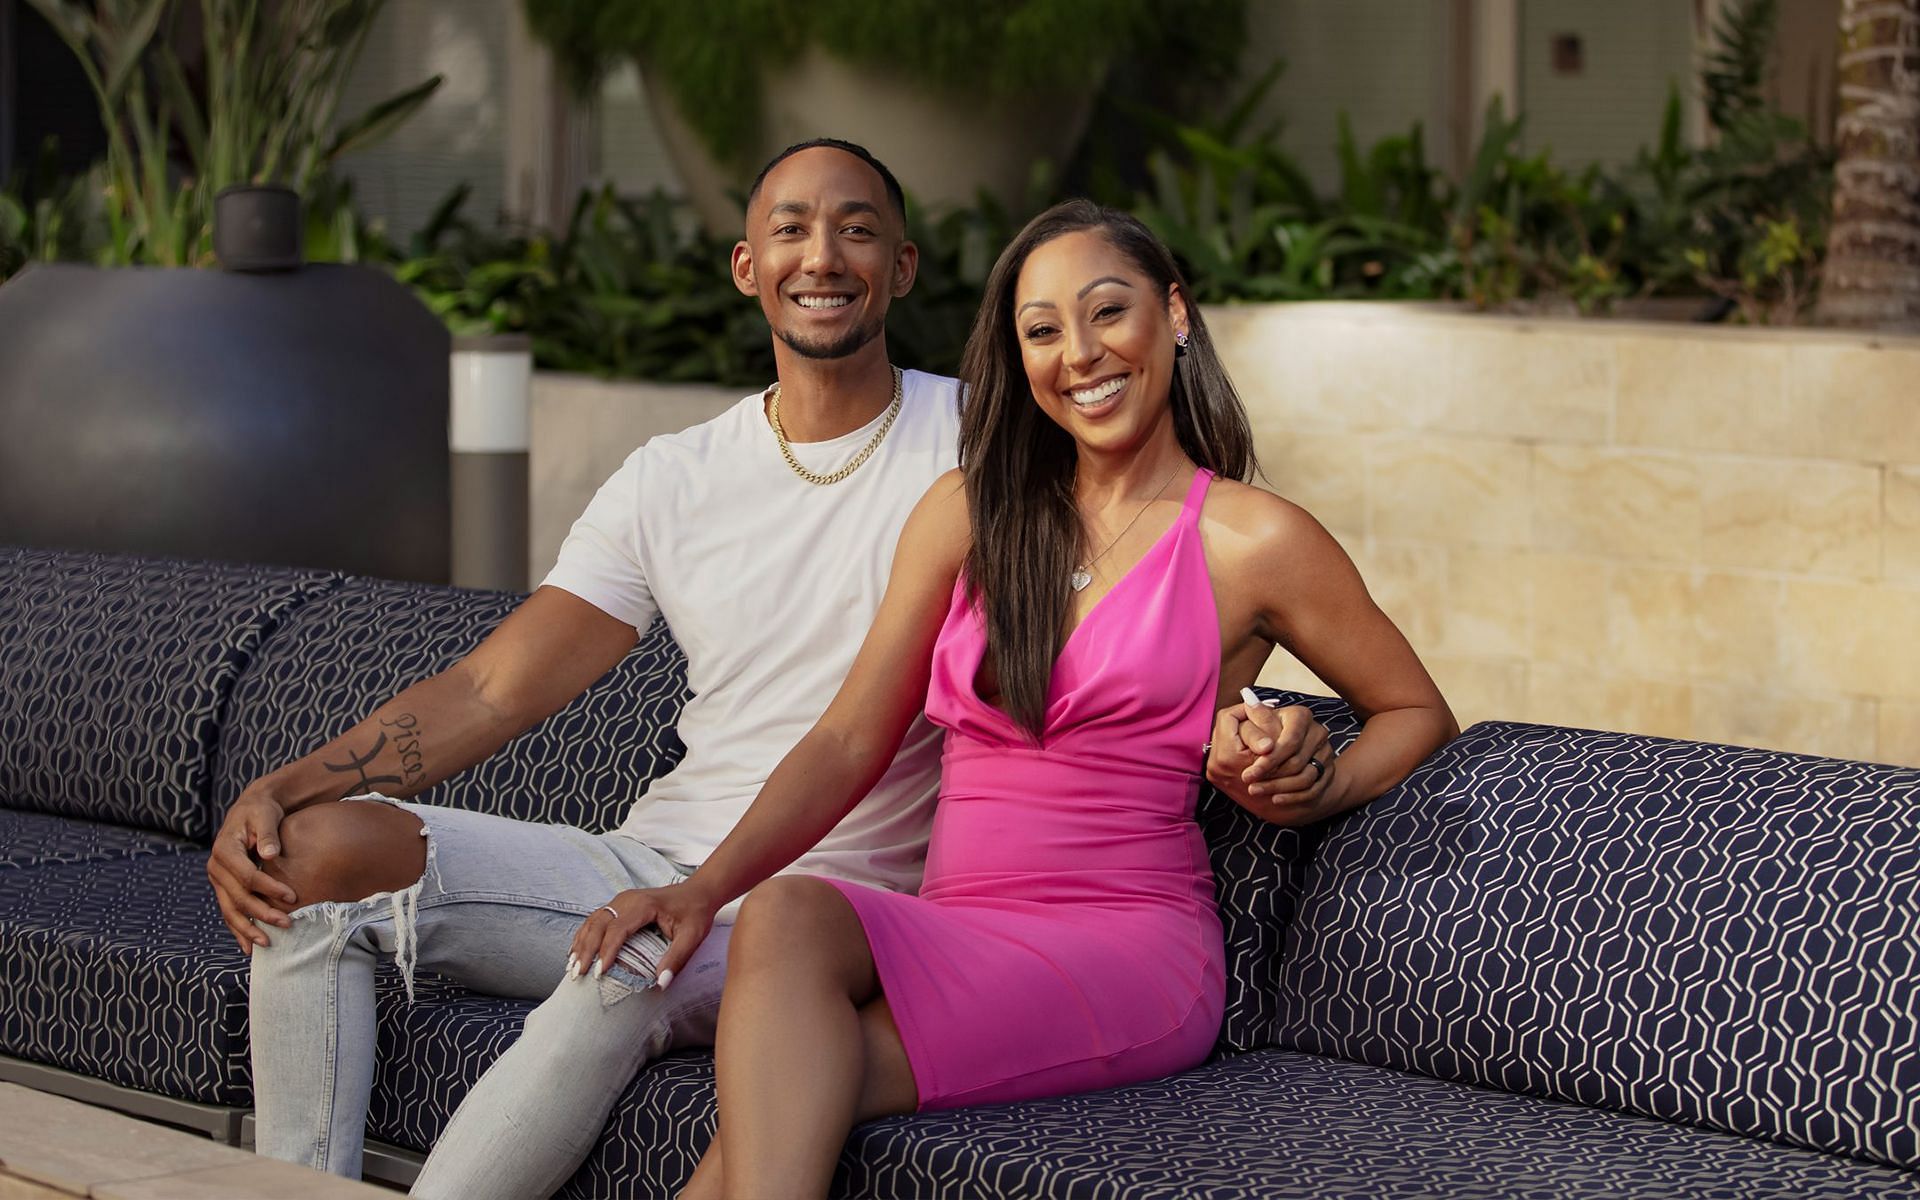 Nate and Stacia to appear on Married at First Sight airing on July 6 (Image via Lifetime0